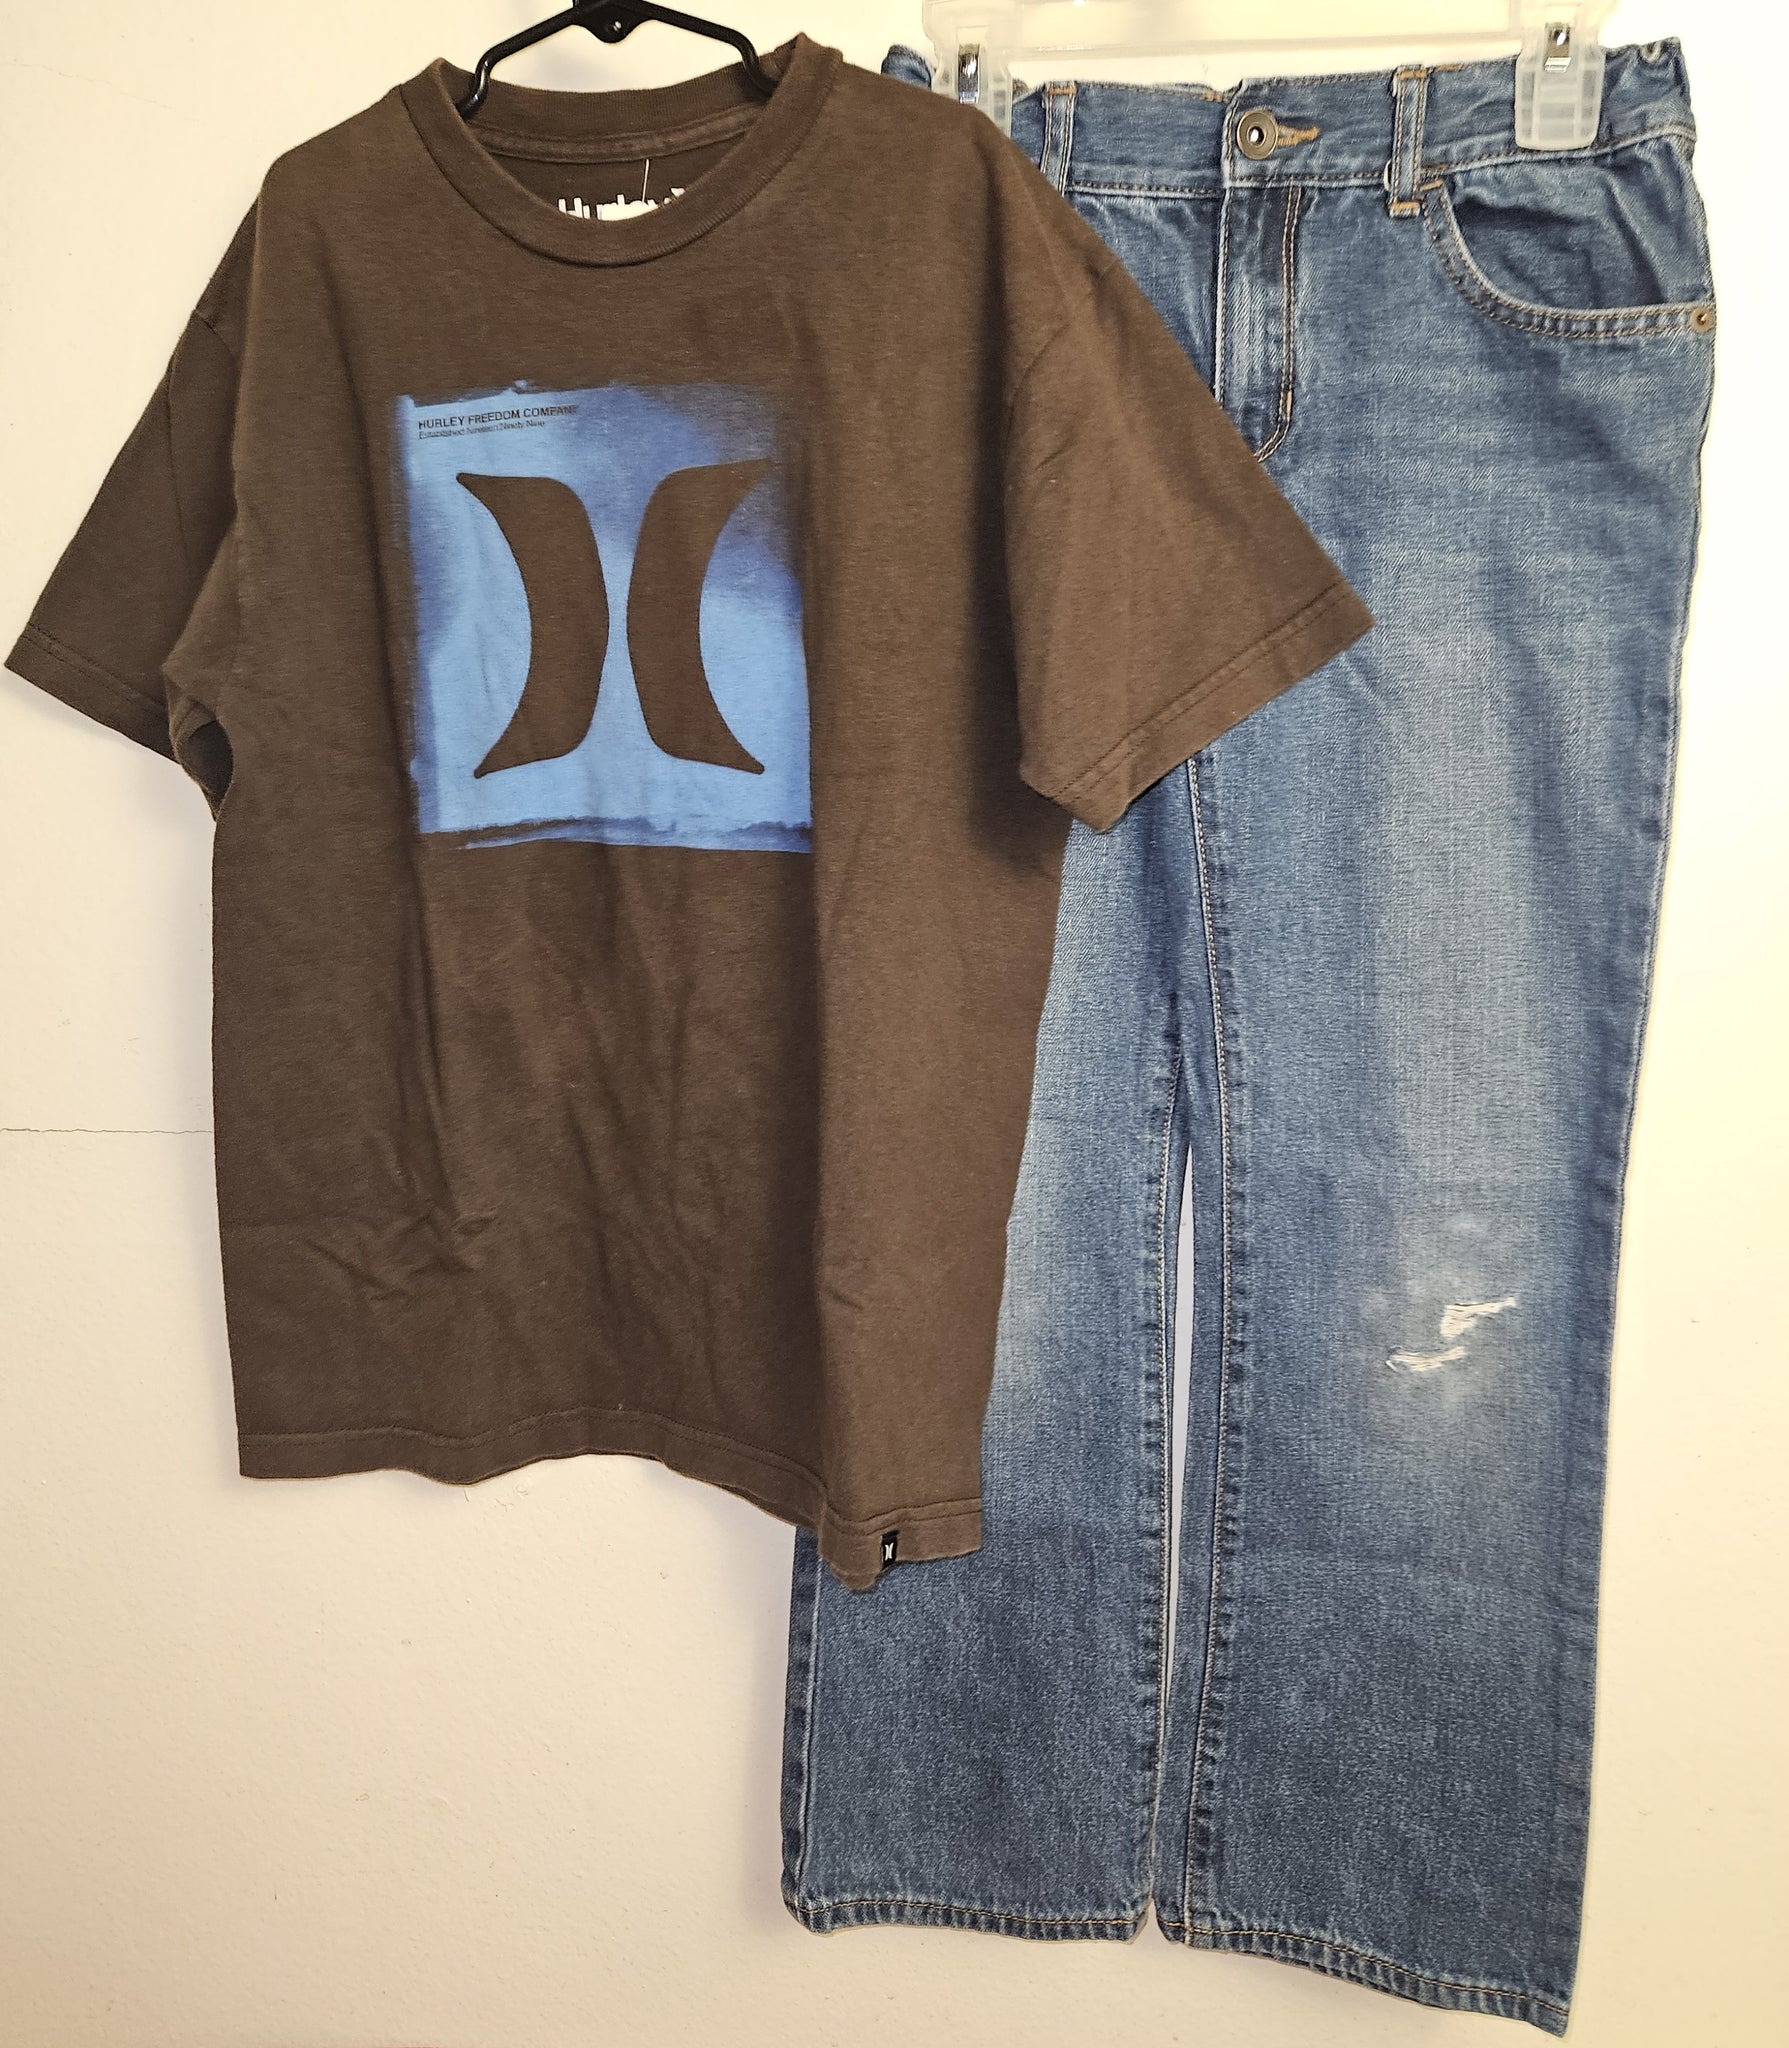 Kids Size 10/Medium Boys 2-Pc HURLEY shirt & Jeans Outfit